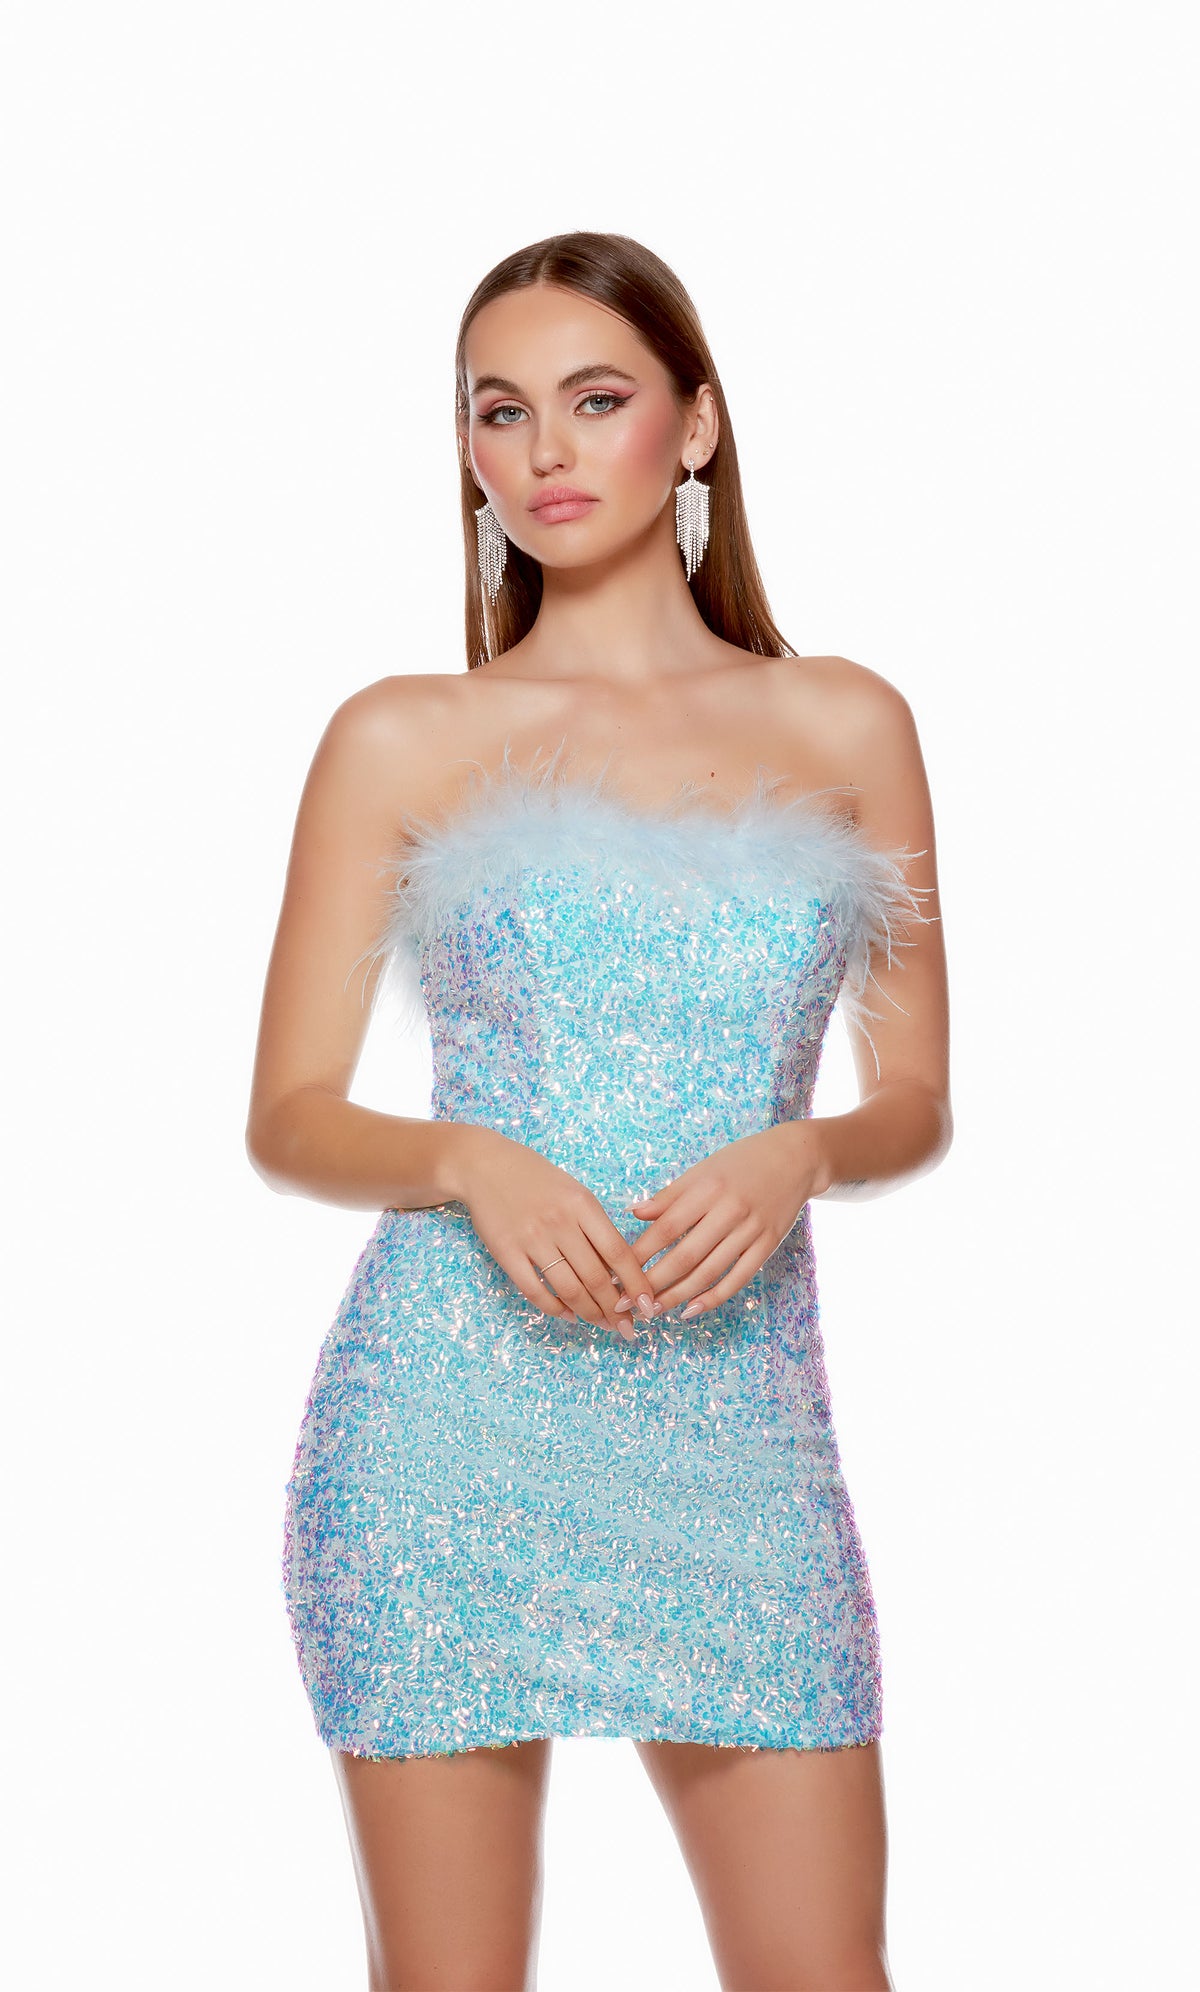 A fun and flirty tube dress made from a sky blue iridescent sequin fabric. The dress has an off-the-shoulder neckline with matching pink feather trim to complete the glam look.